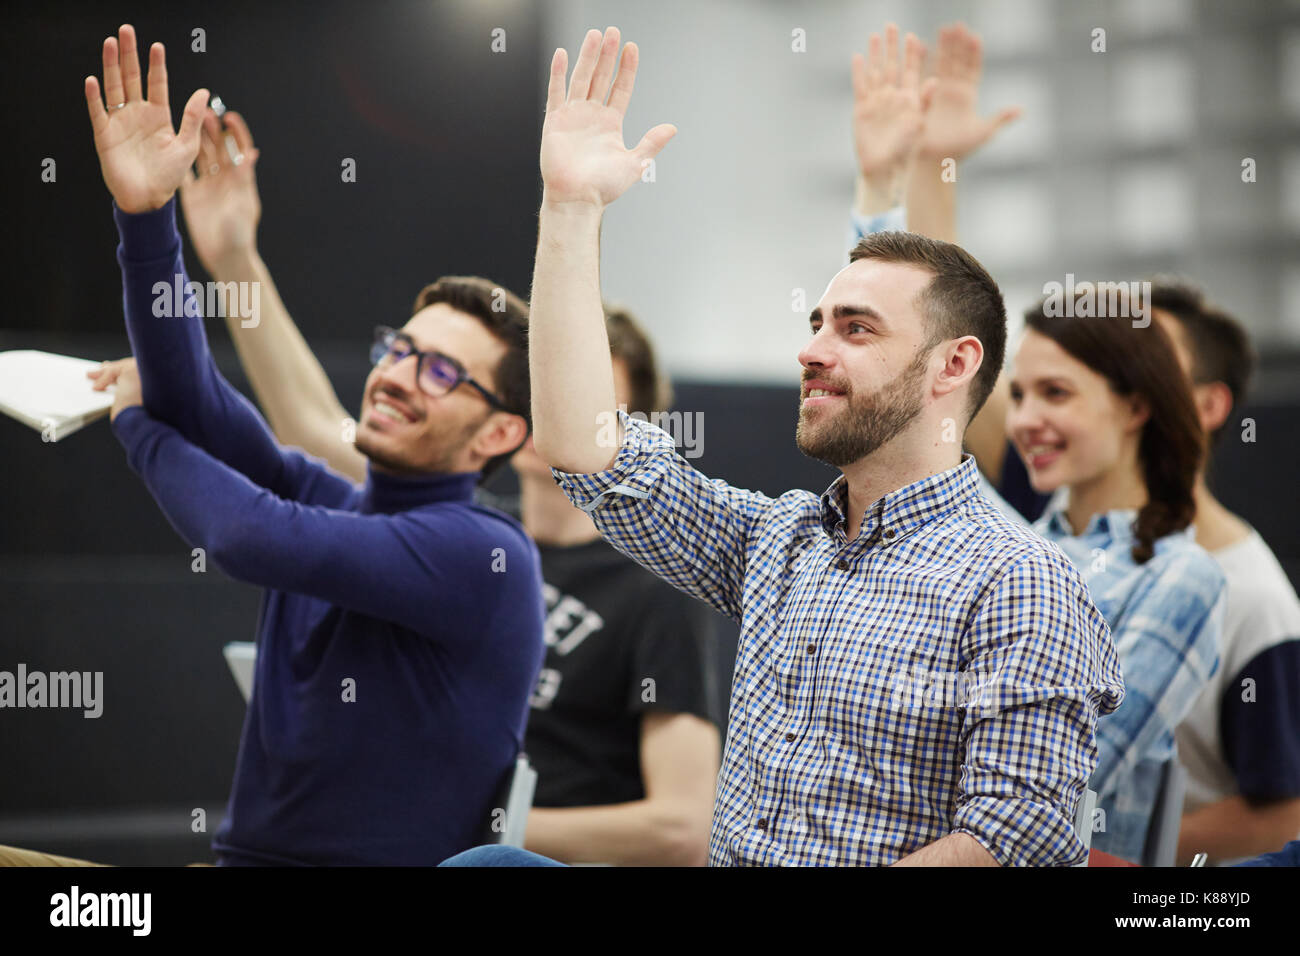 Clever business course learners raising hands to answer questions of teacher or making suggestion during discussion Stock Photo